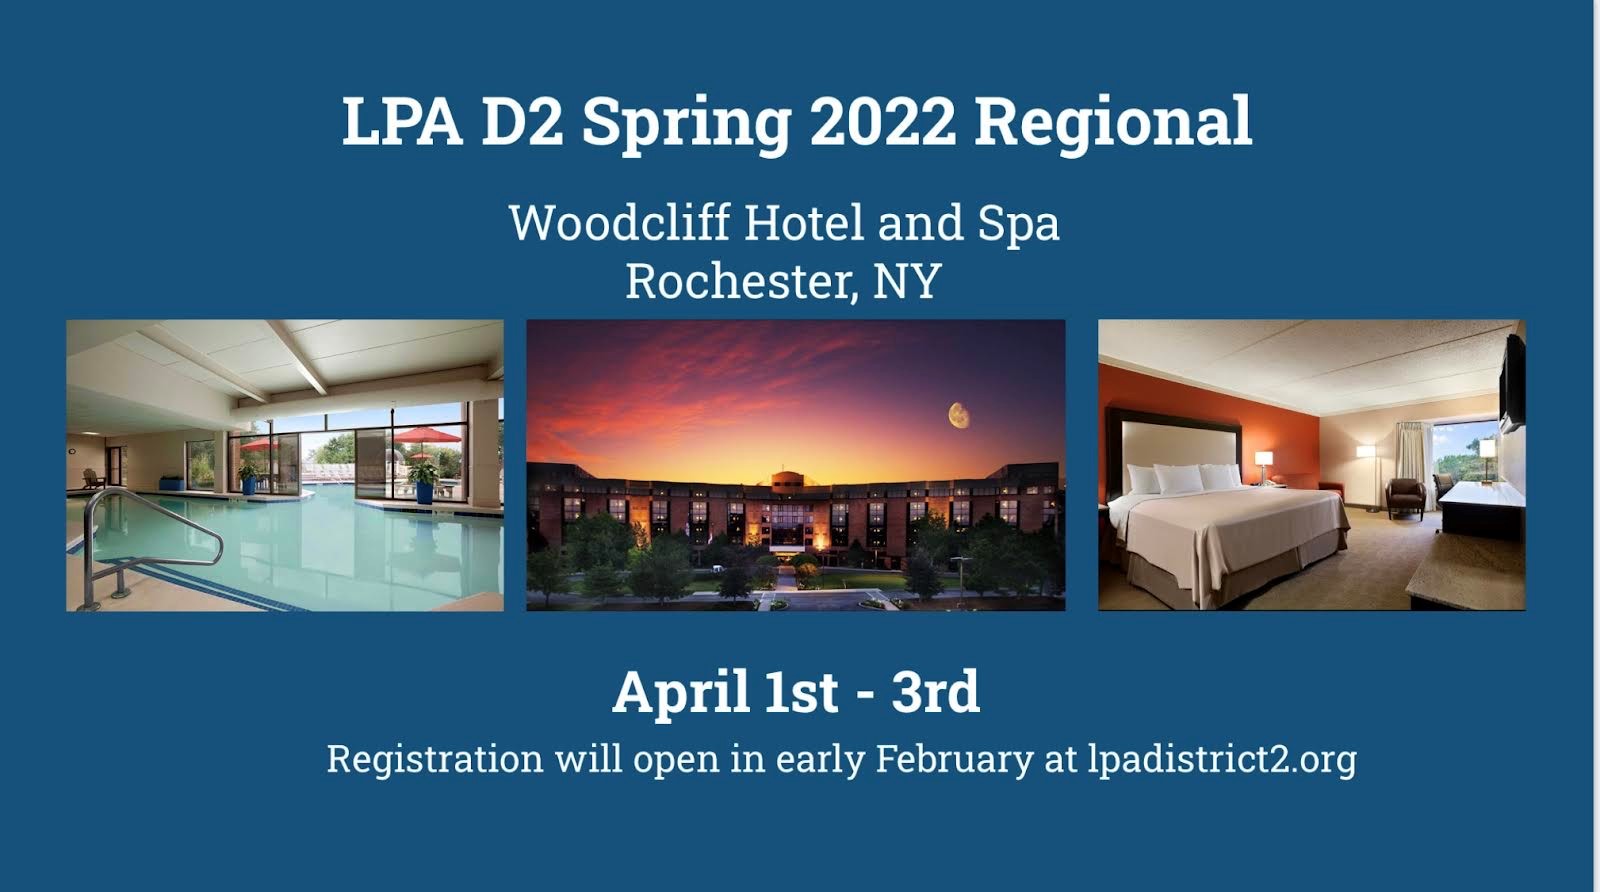 image includes 3 hotel views, and the text in white with location and date of D2 Spring 2022 Regional